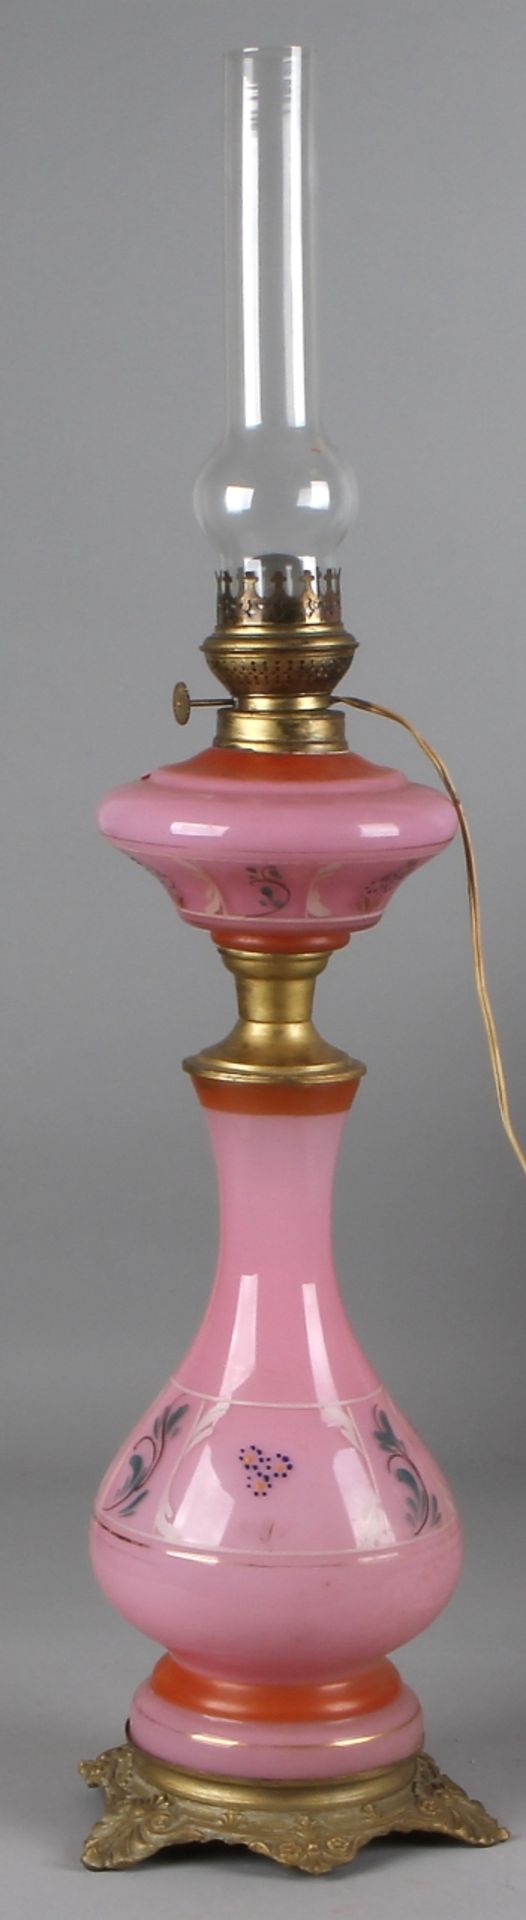 Large antique table opalineglazen kerosene lamp, pink with hand paintings, 1900. France in good